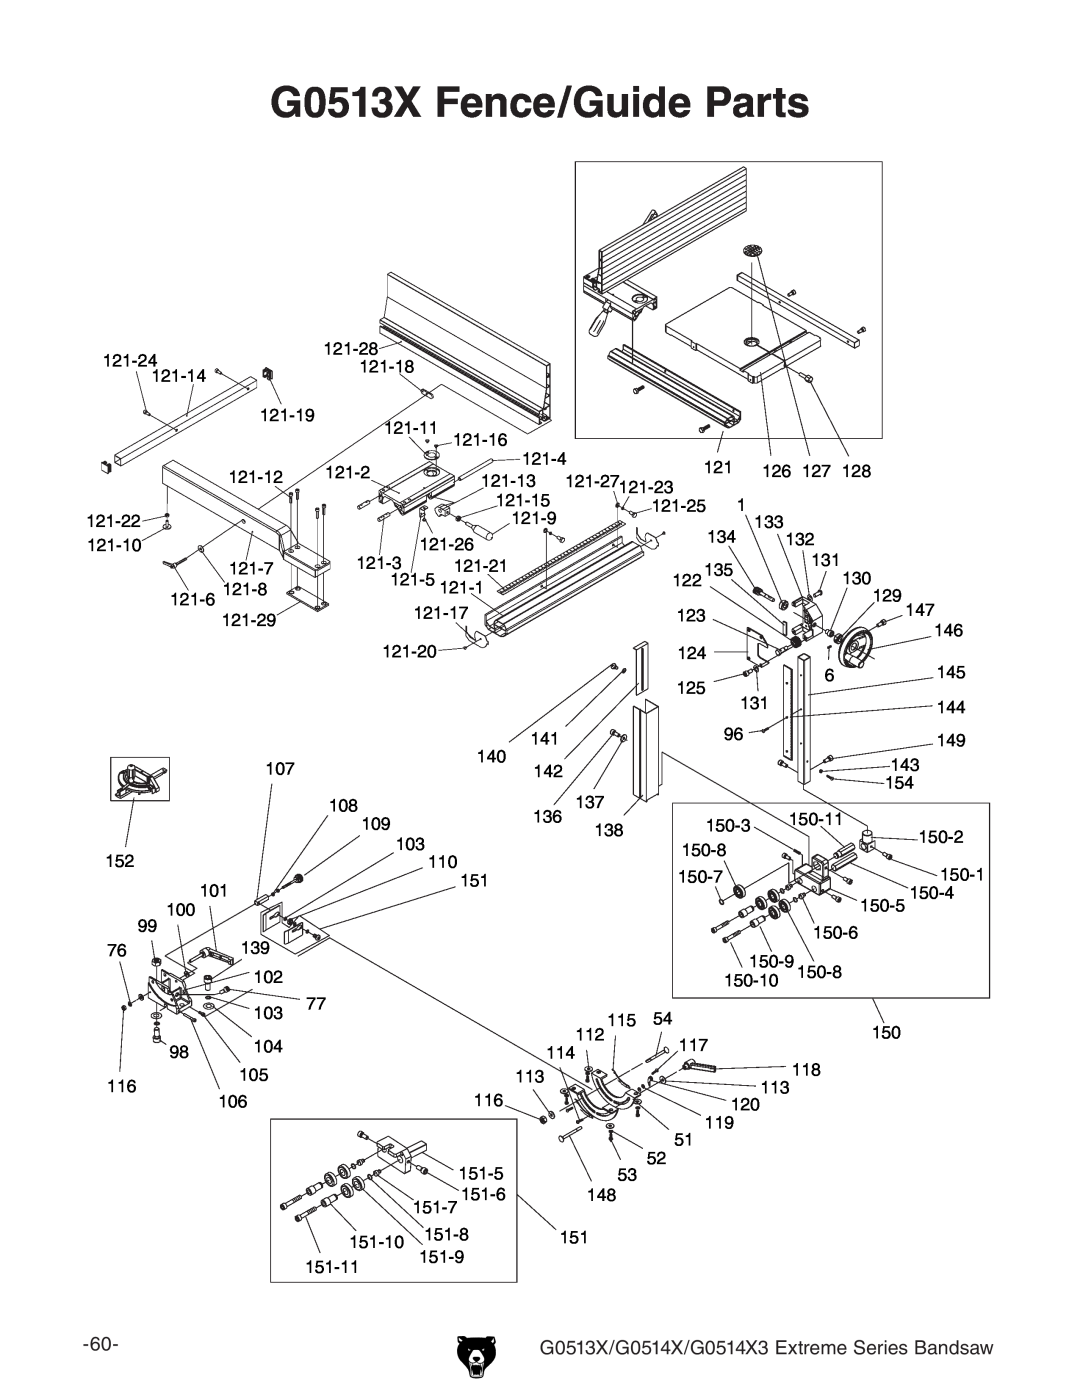 Grizzly owner manual G0513X Fence/Guide Parts, G0513X/G0514X/G0514X3 Extreme Series Bandsaw 